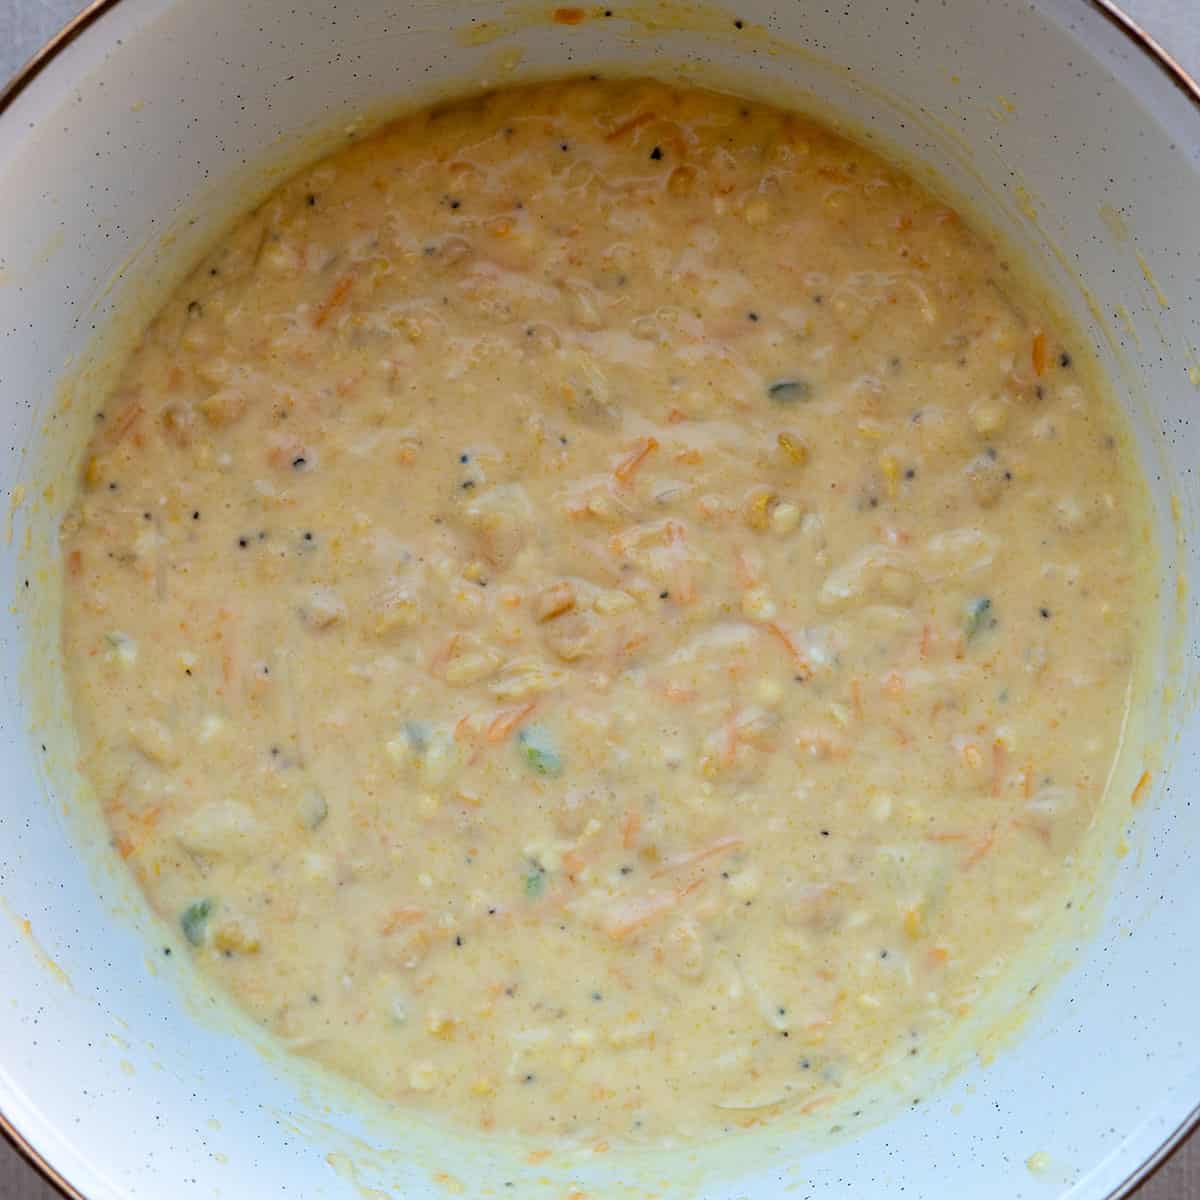 corn pudding ingredients mixed together.